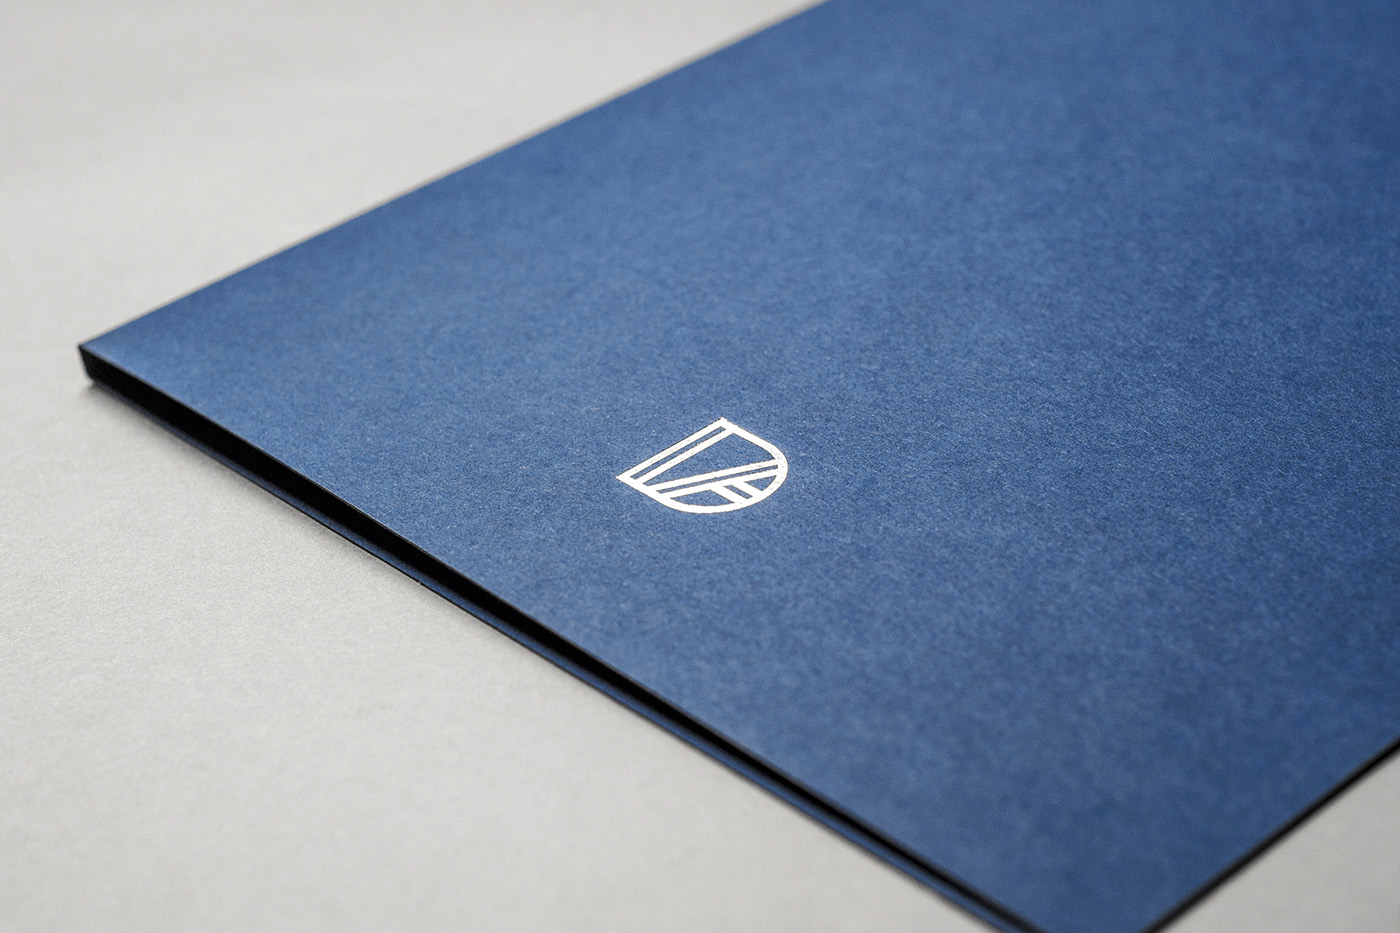 tradition business financial monogram blue White paper Hot Foil heritage romania Stationery corporate Arjowiggins creative law firm